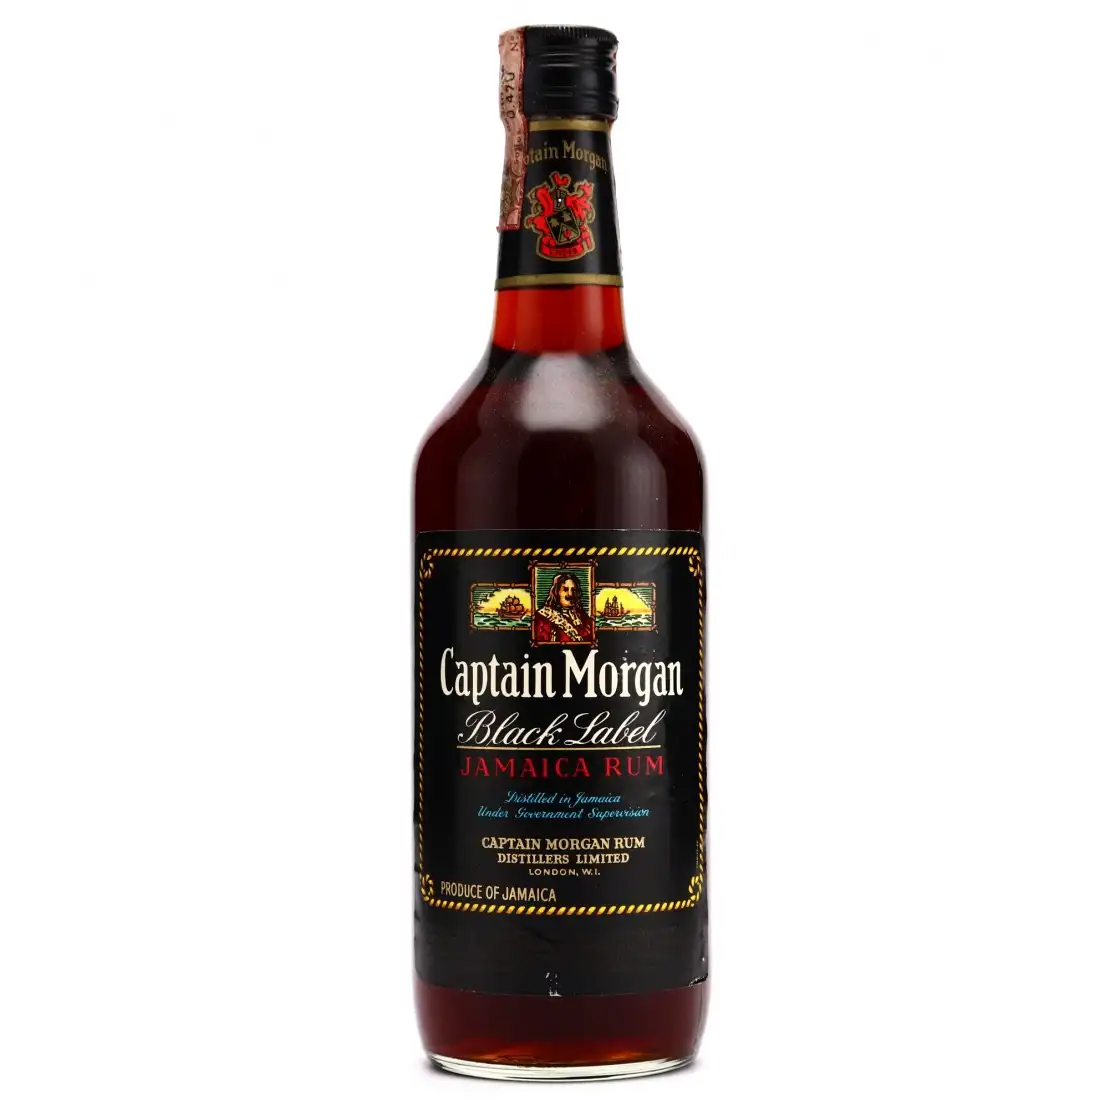 Image of the front of the bottle of the rum Captain Morgan Black Label Jamaica Rum (Old Version)